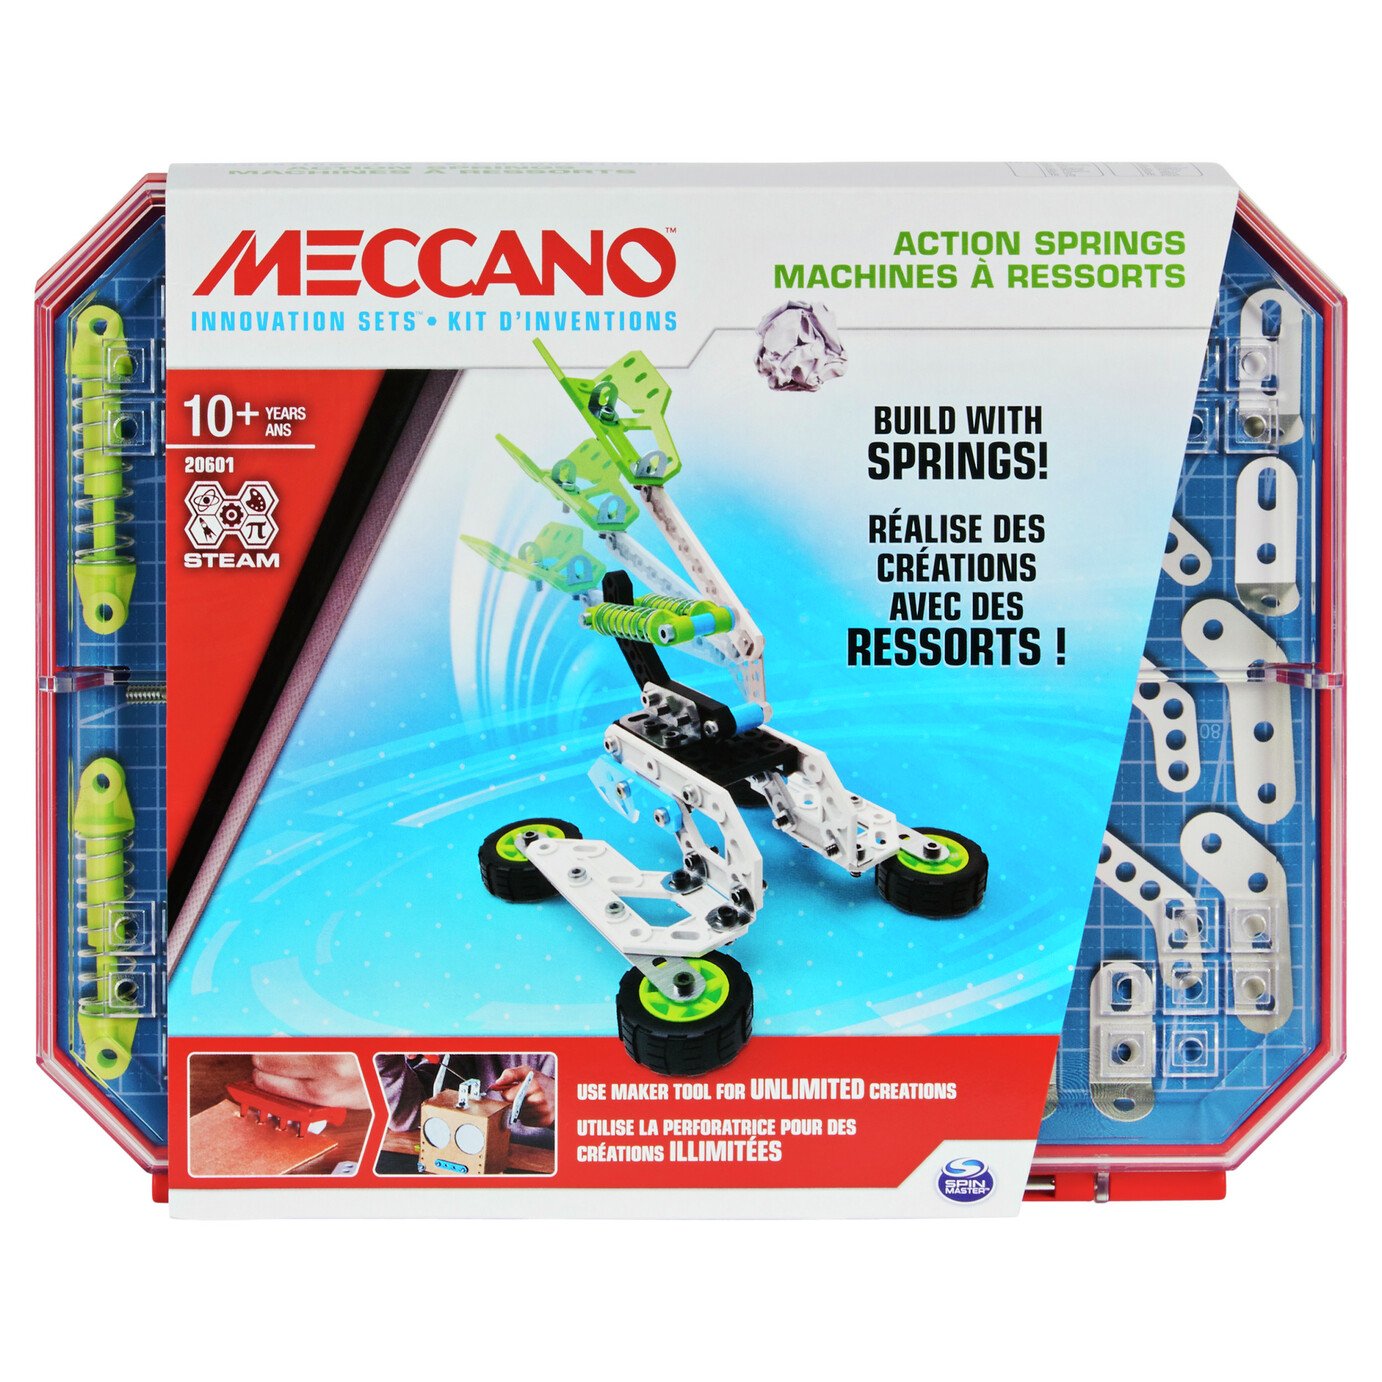 Meccano Inventor Action Springs Construction Set Review